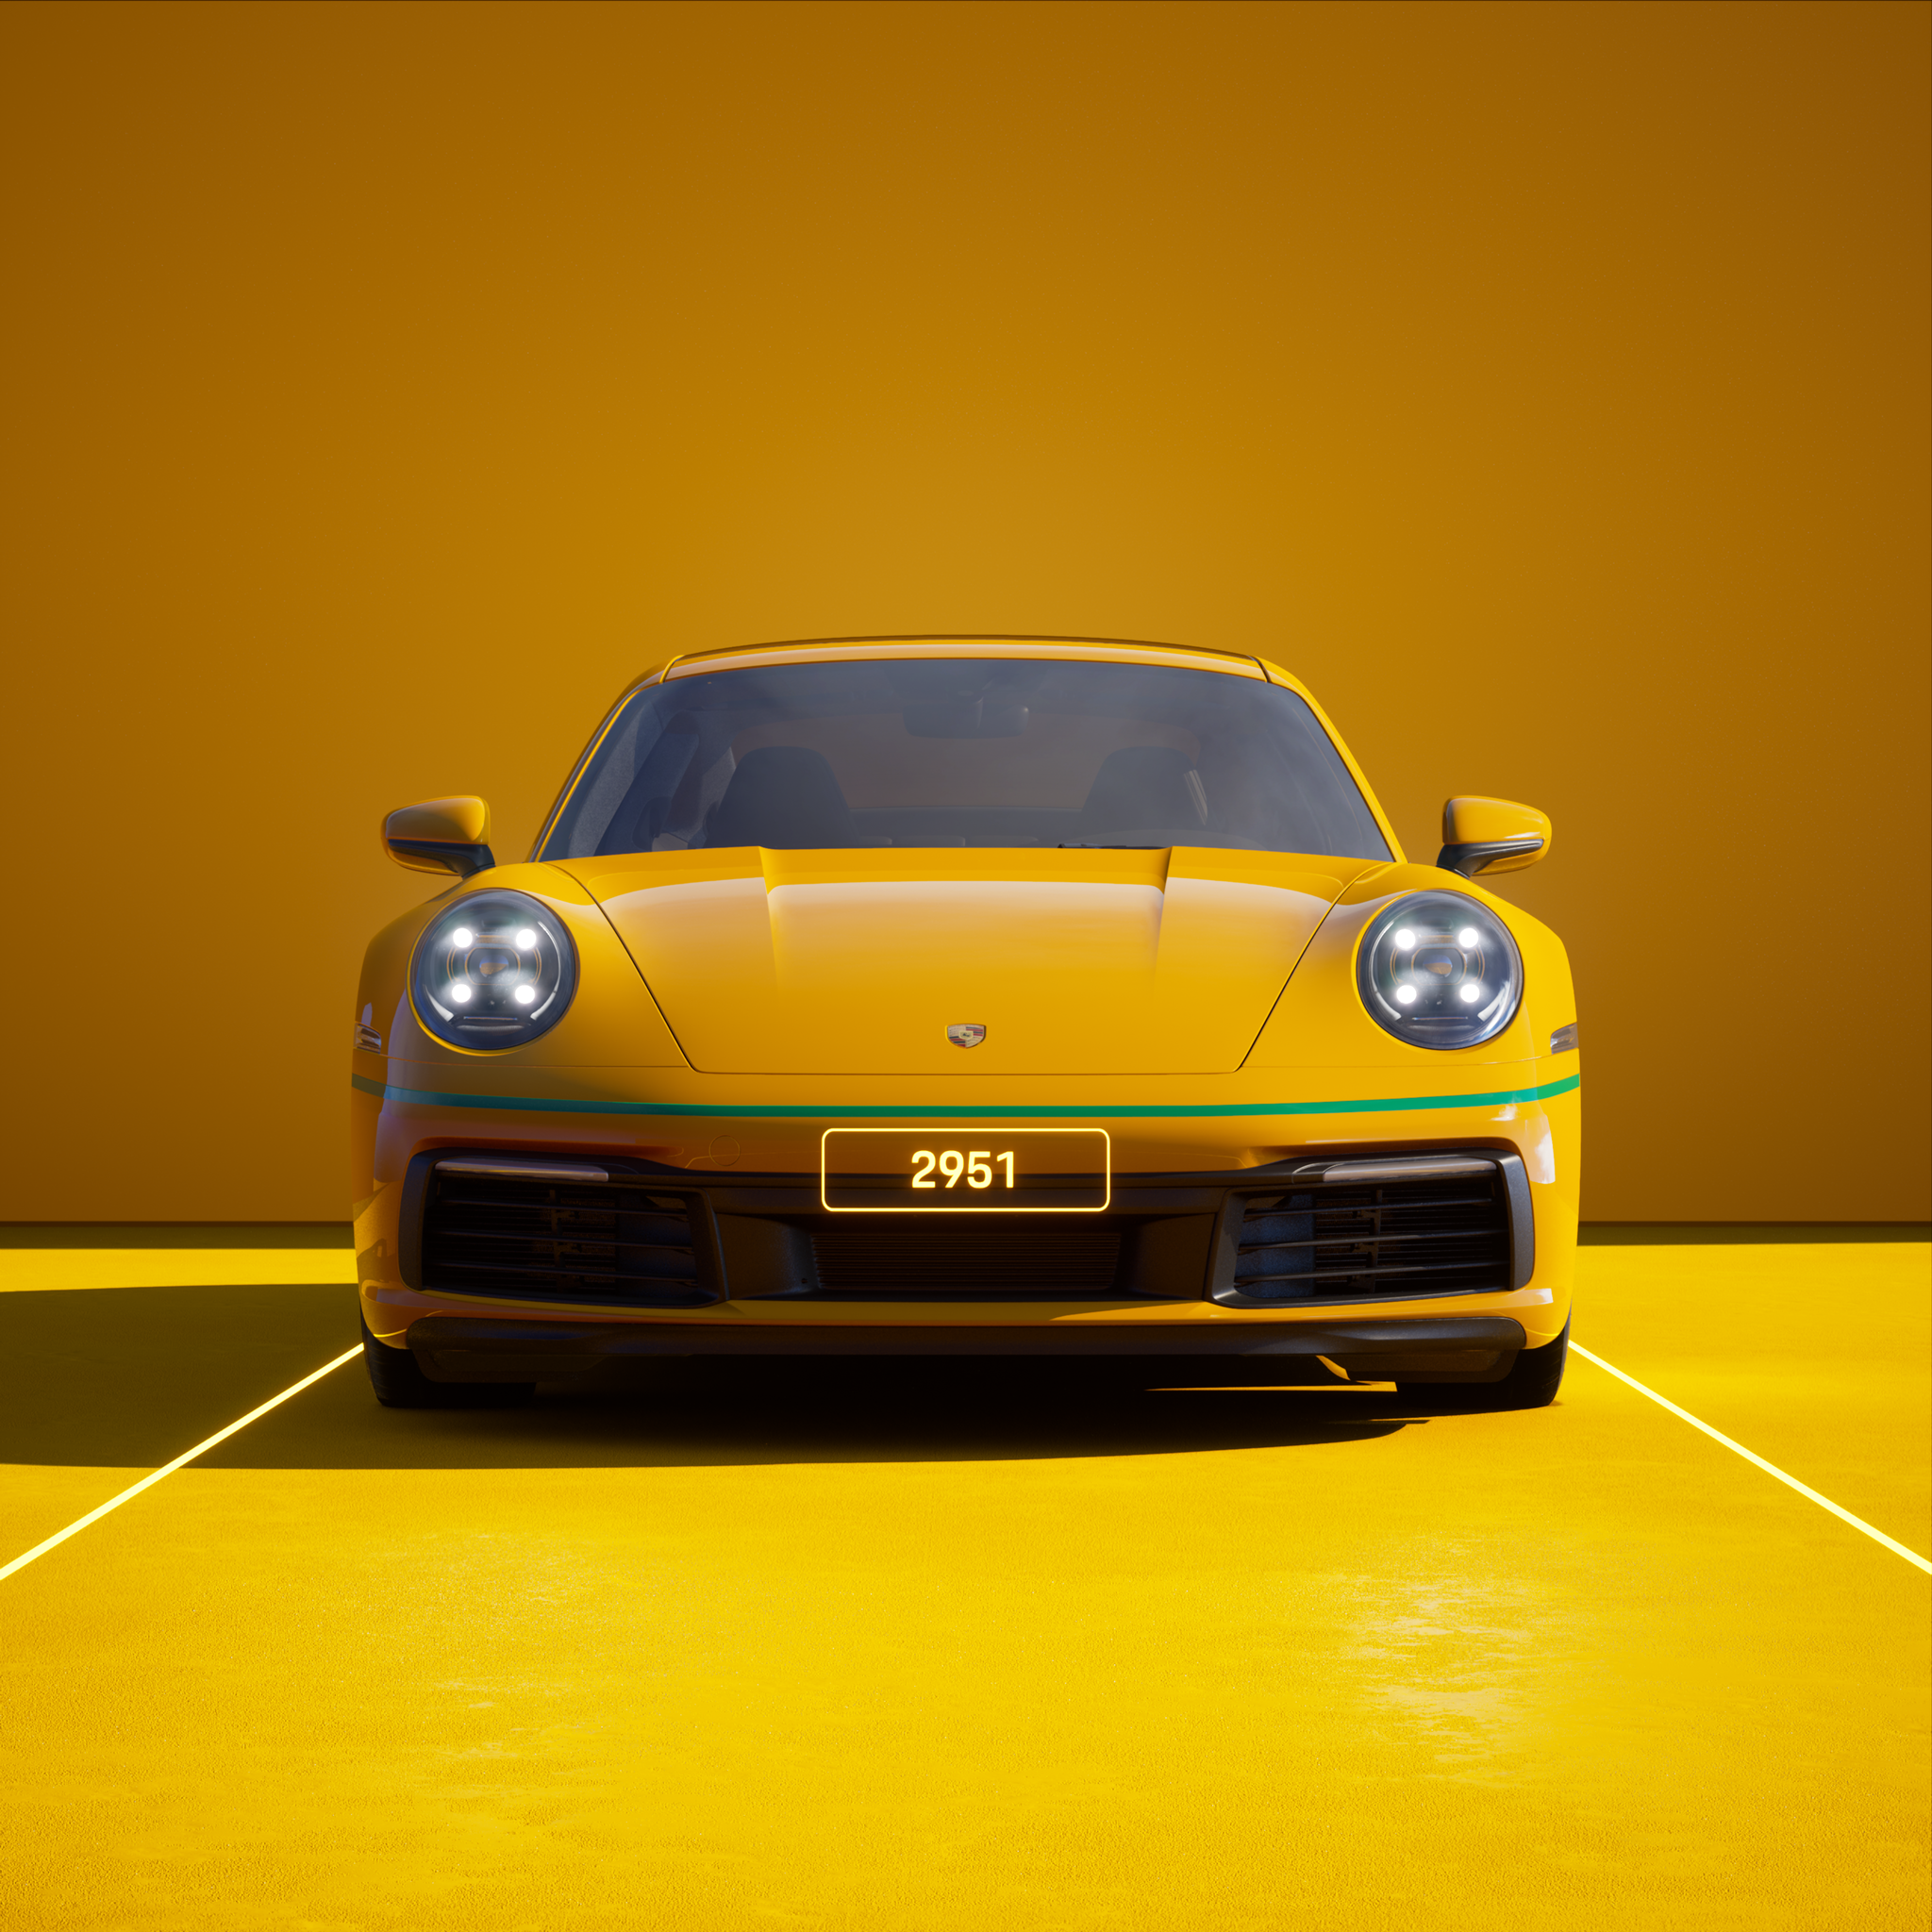 The PORSCHΞ 911 2951 image in phase